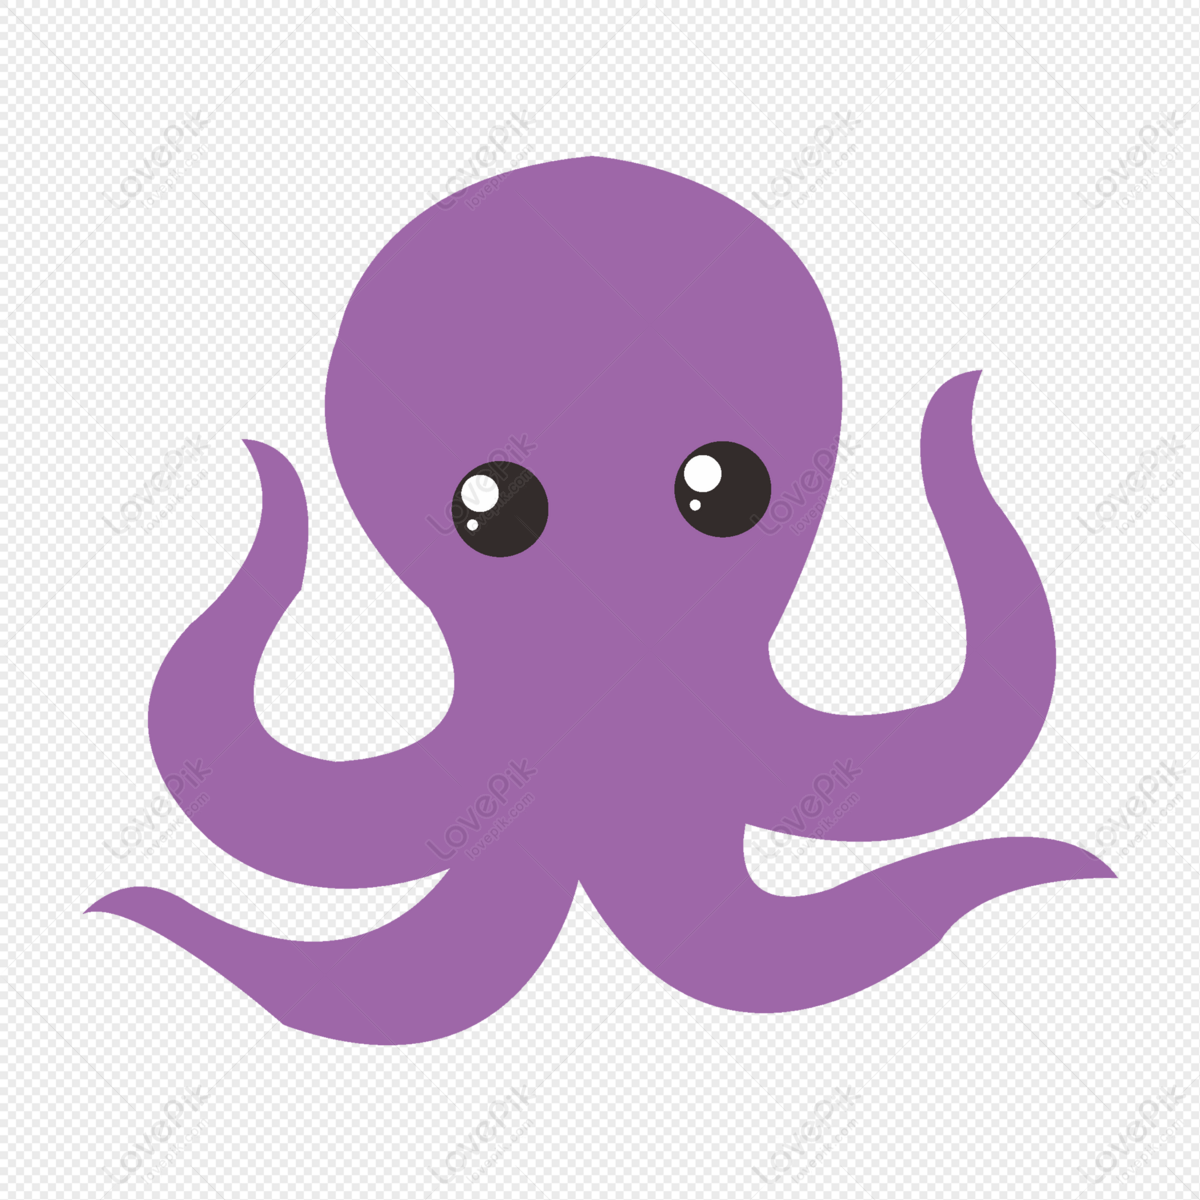 Cartoon Octopus PNG Transparent And Clipart Image For Free Download -  Lovepik | 401305296